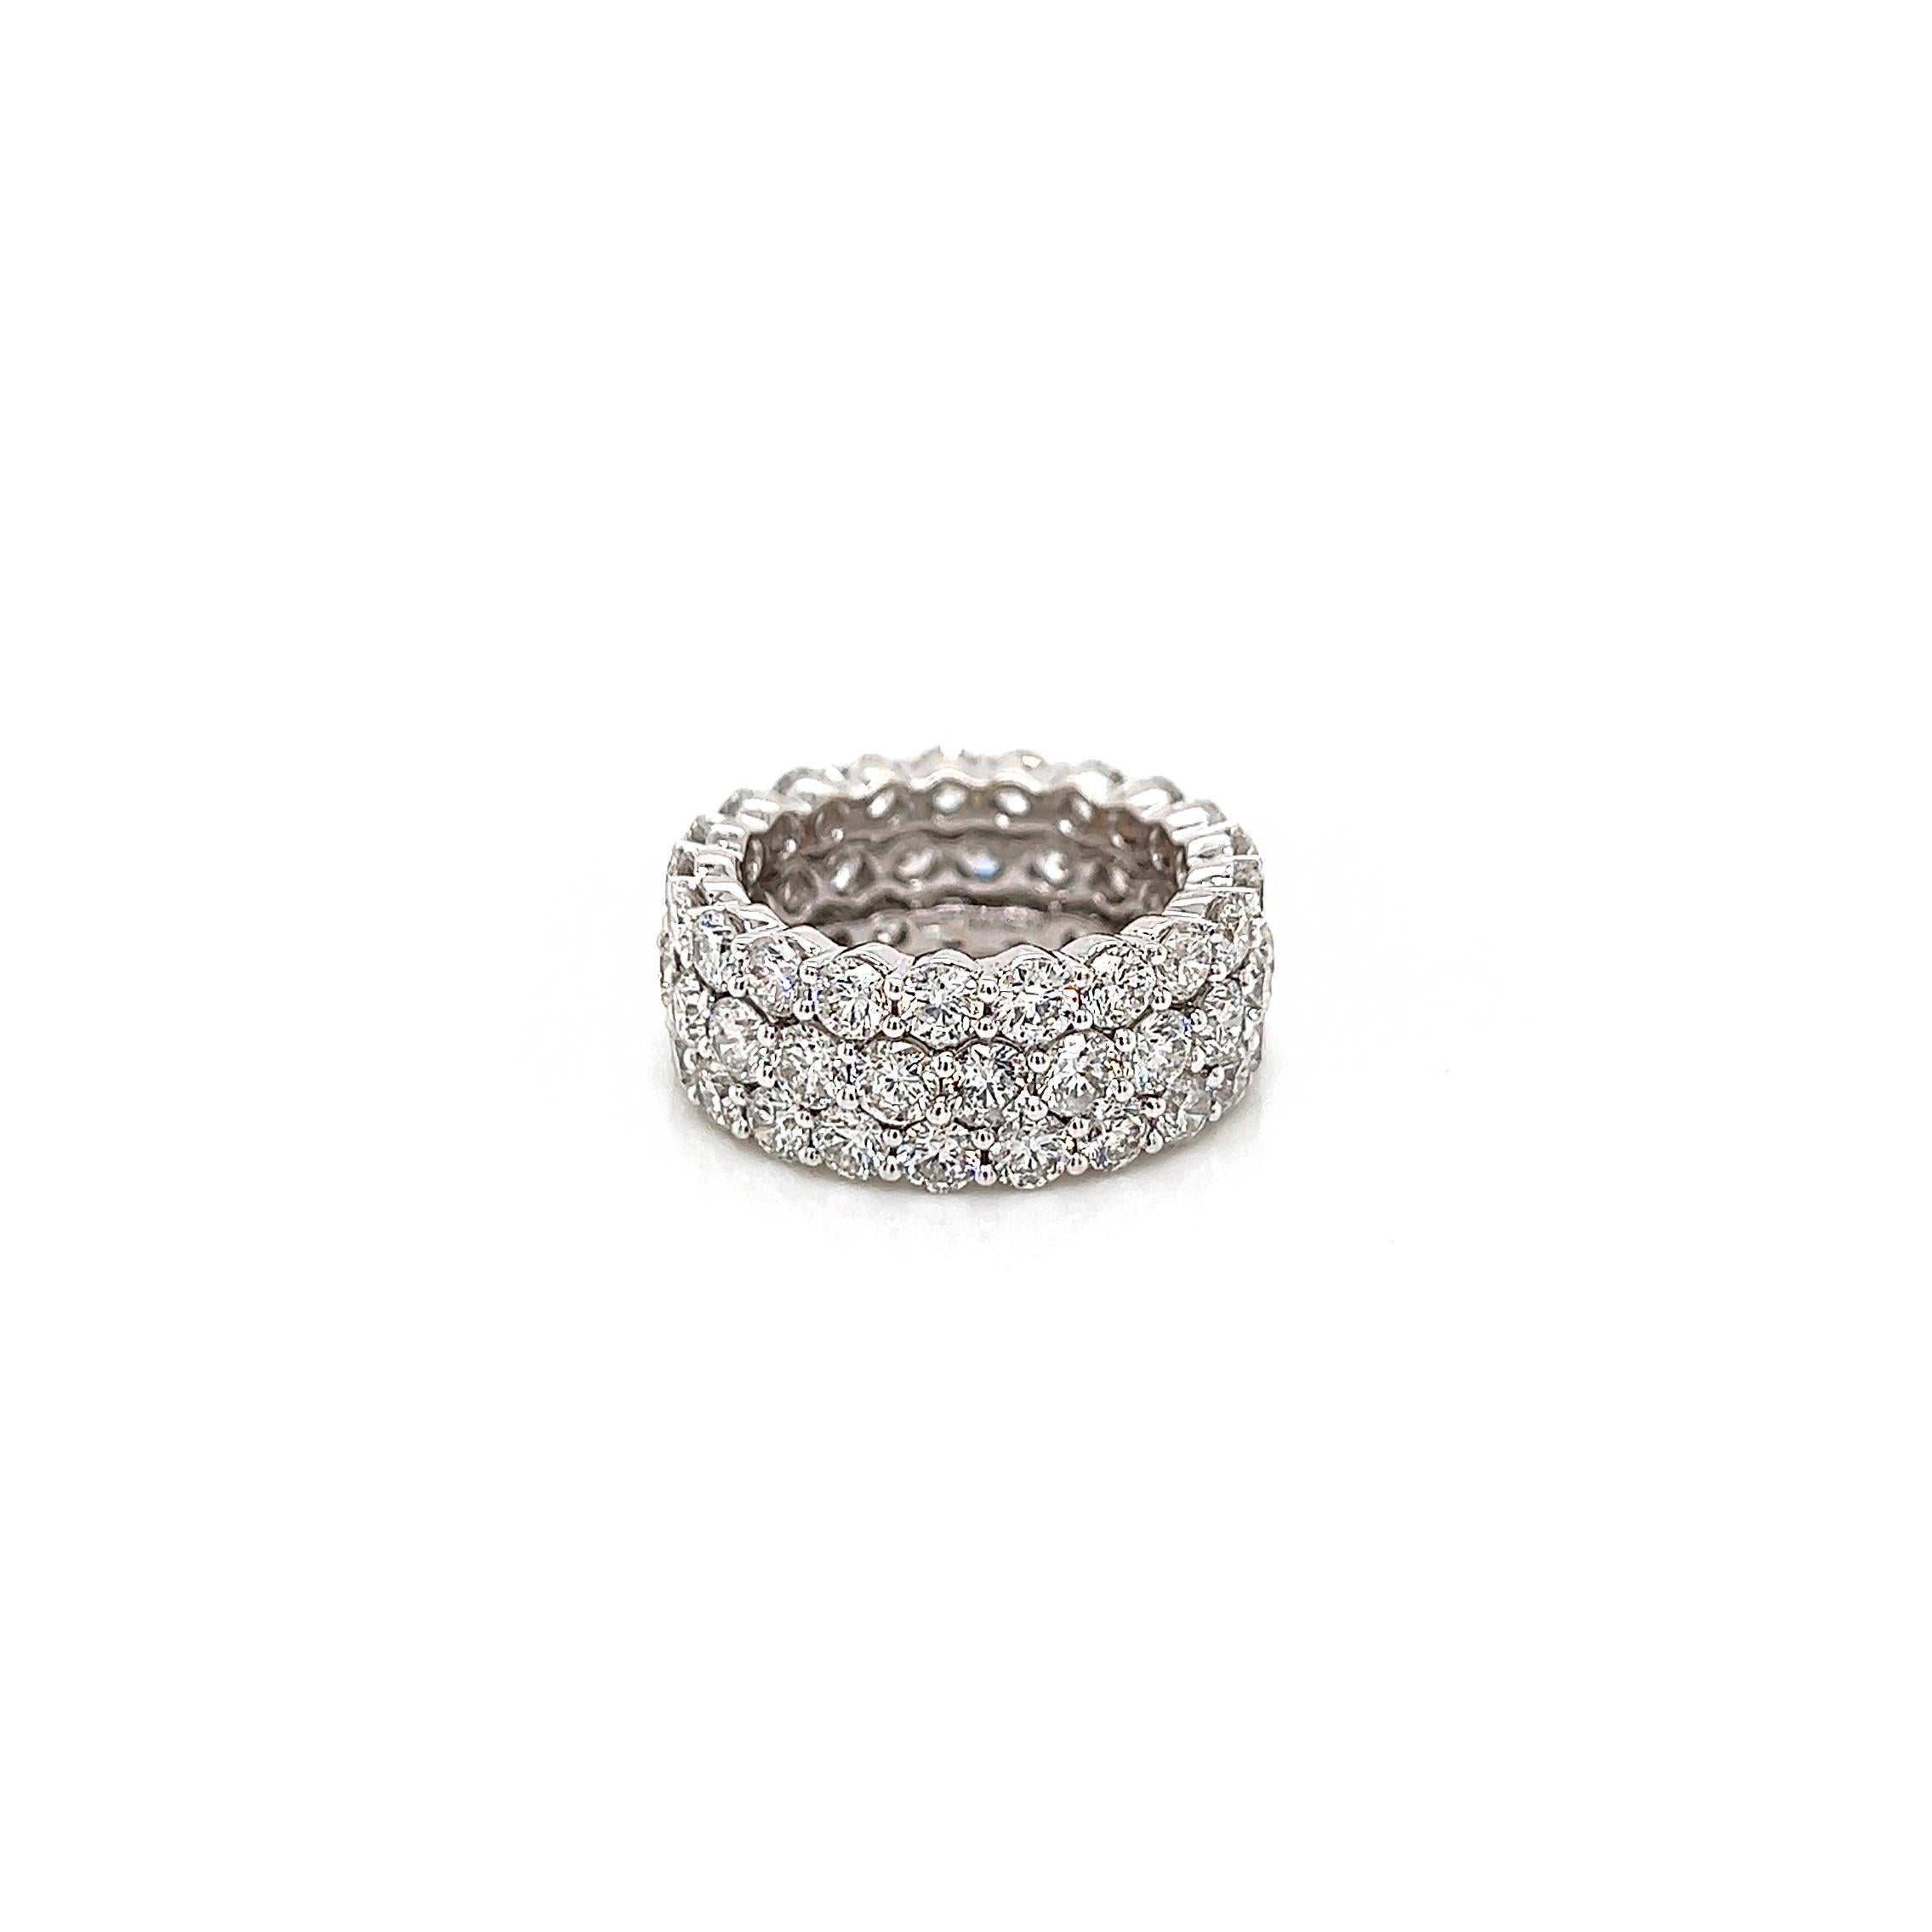 7.56 Total Carat Ladies Prong-Set Diamond Eternity Band

-Metal Type: 18K White Gold
-7.56 Carat Round Natural Diamonds
-F-G Color
-SI1-SI2 Clarity
-Size 6.0

Made in New York City.